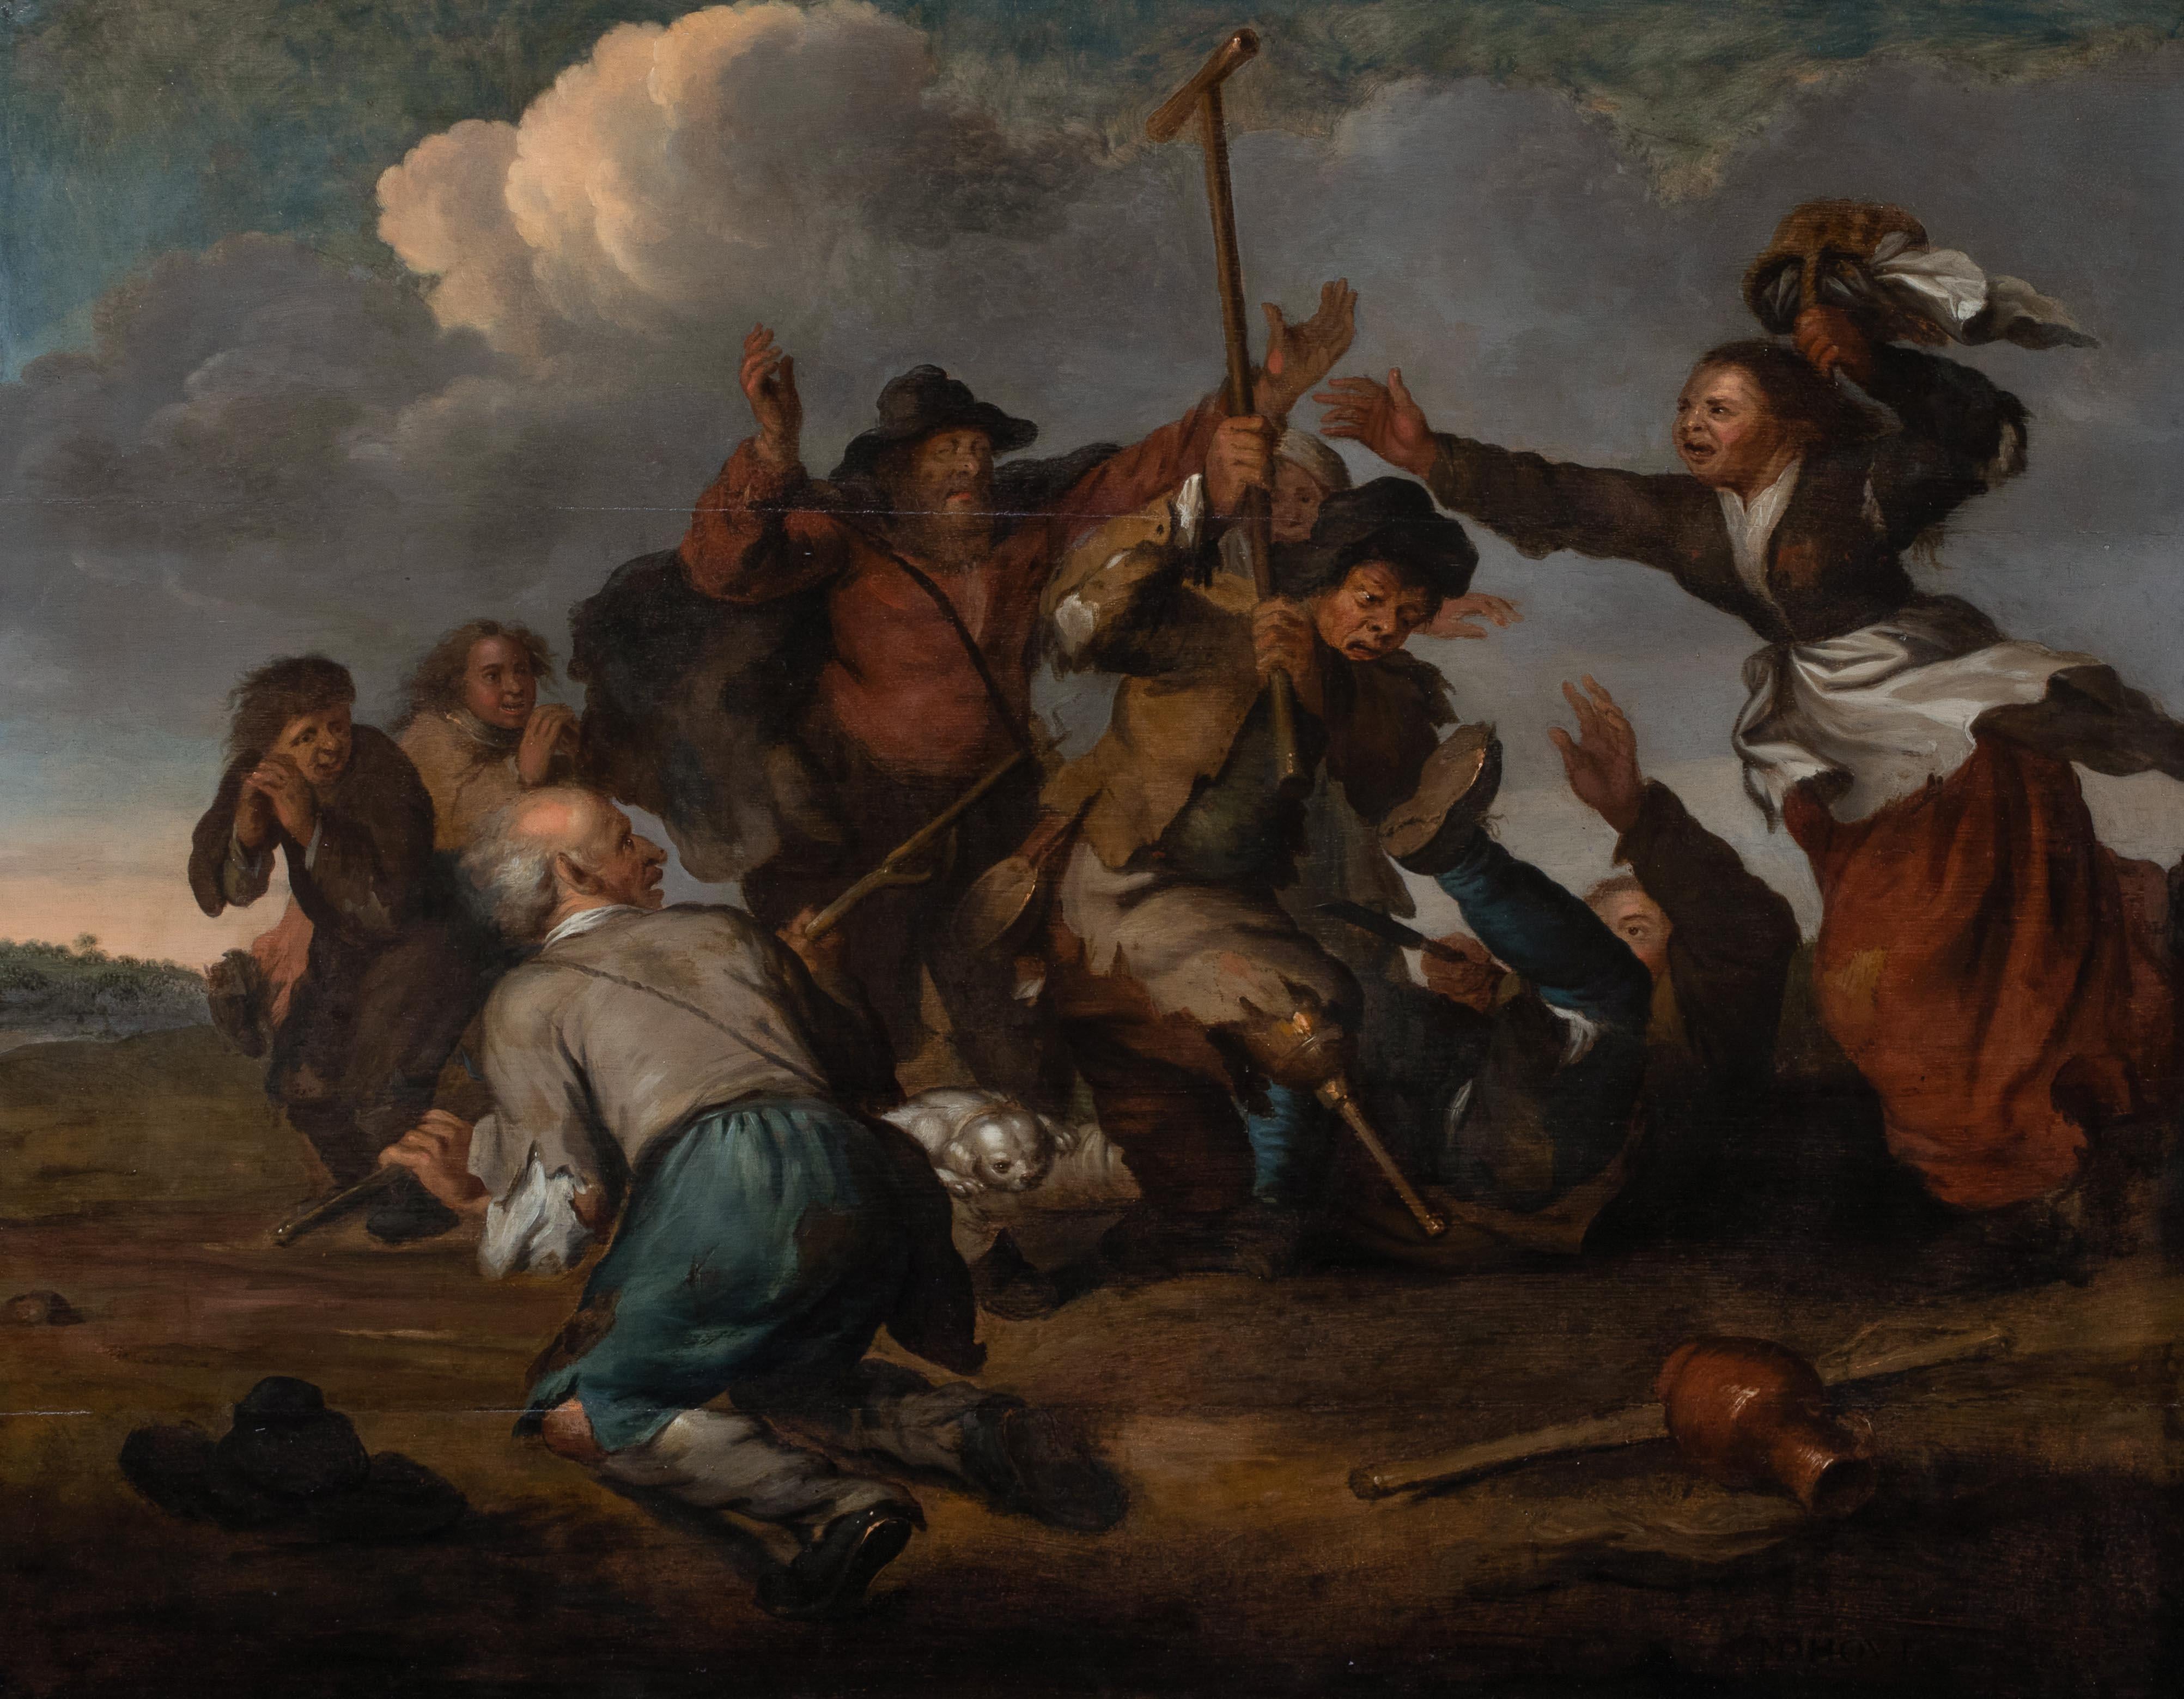 Unknown Portrait Painting - The Battle Of The Peasants, 17th Century   by M D HOUT (1627-1680)